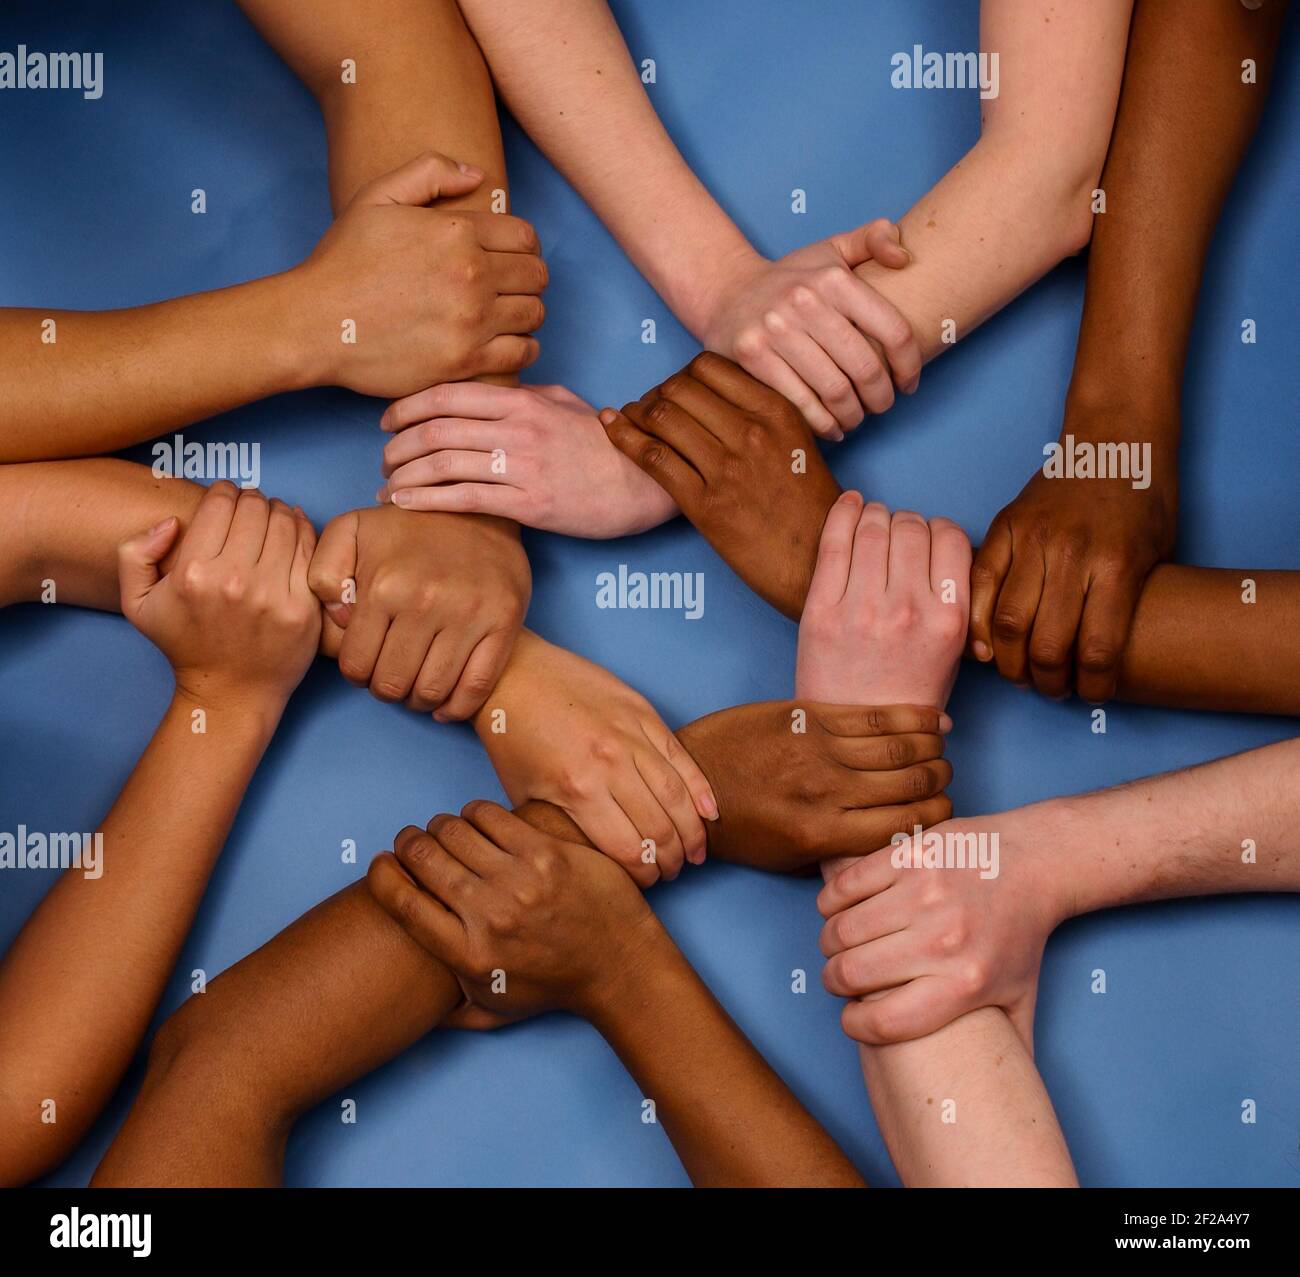 Linked arms and hands showing strength in teamwork against a blue background Stock Photo